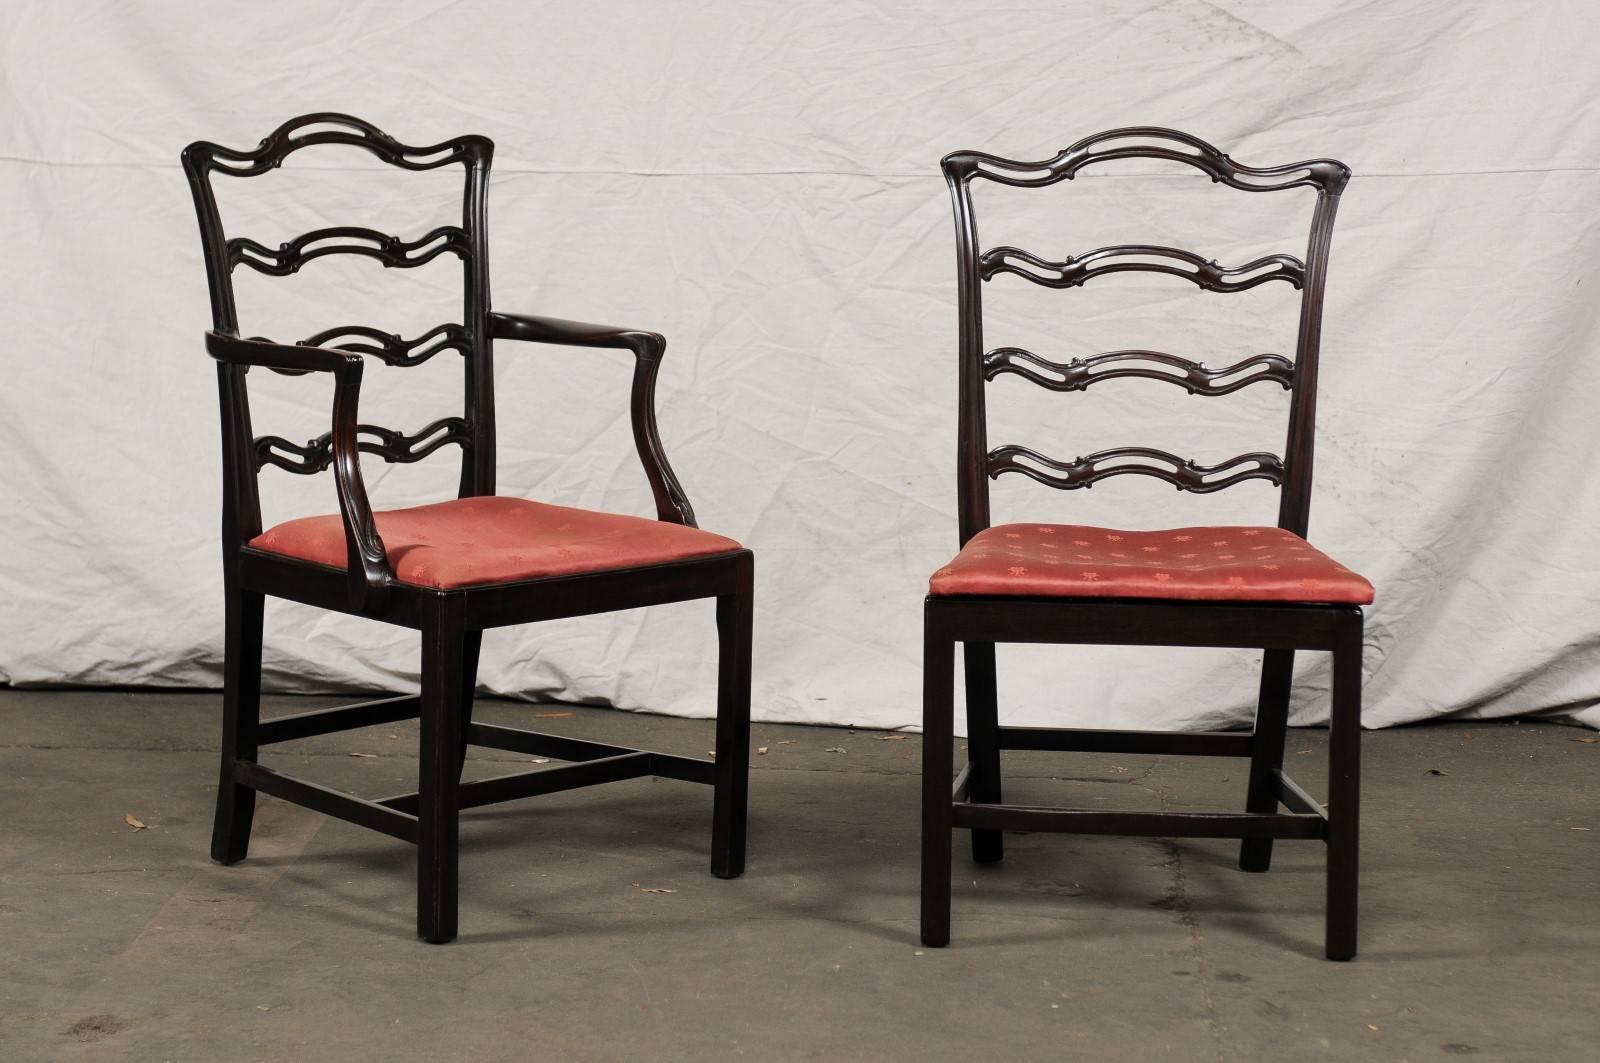 Set of eight George III style ribbon back mahogany dining chairs, six sides, two-arm
Measure: seat height 18" tall, arm height 28" tall.